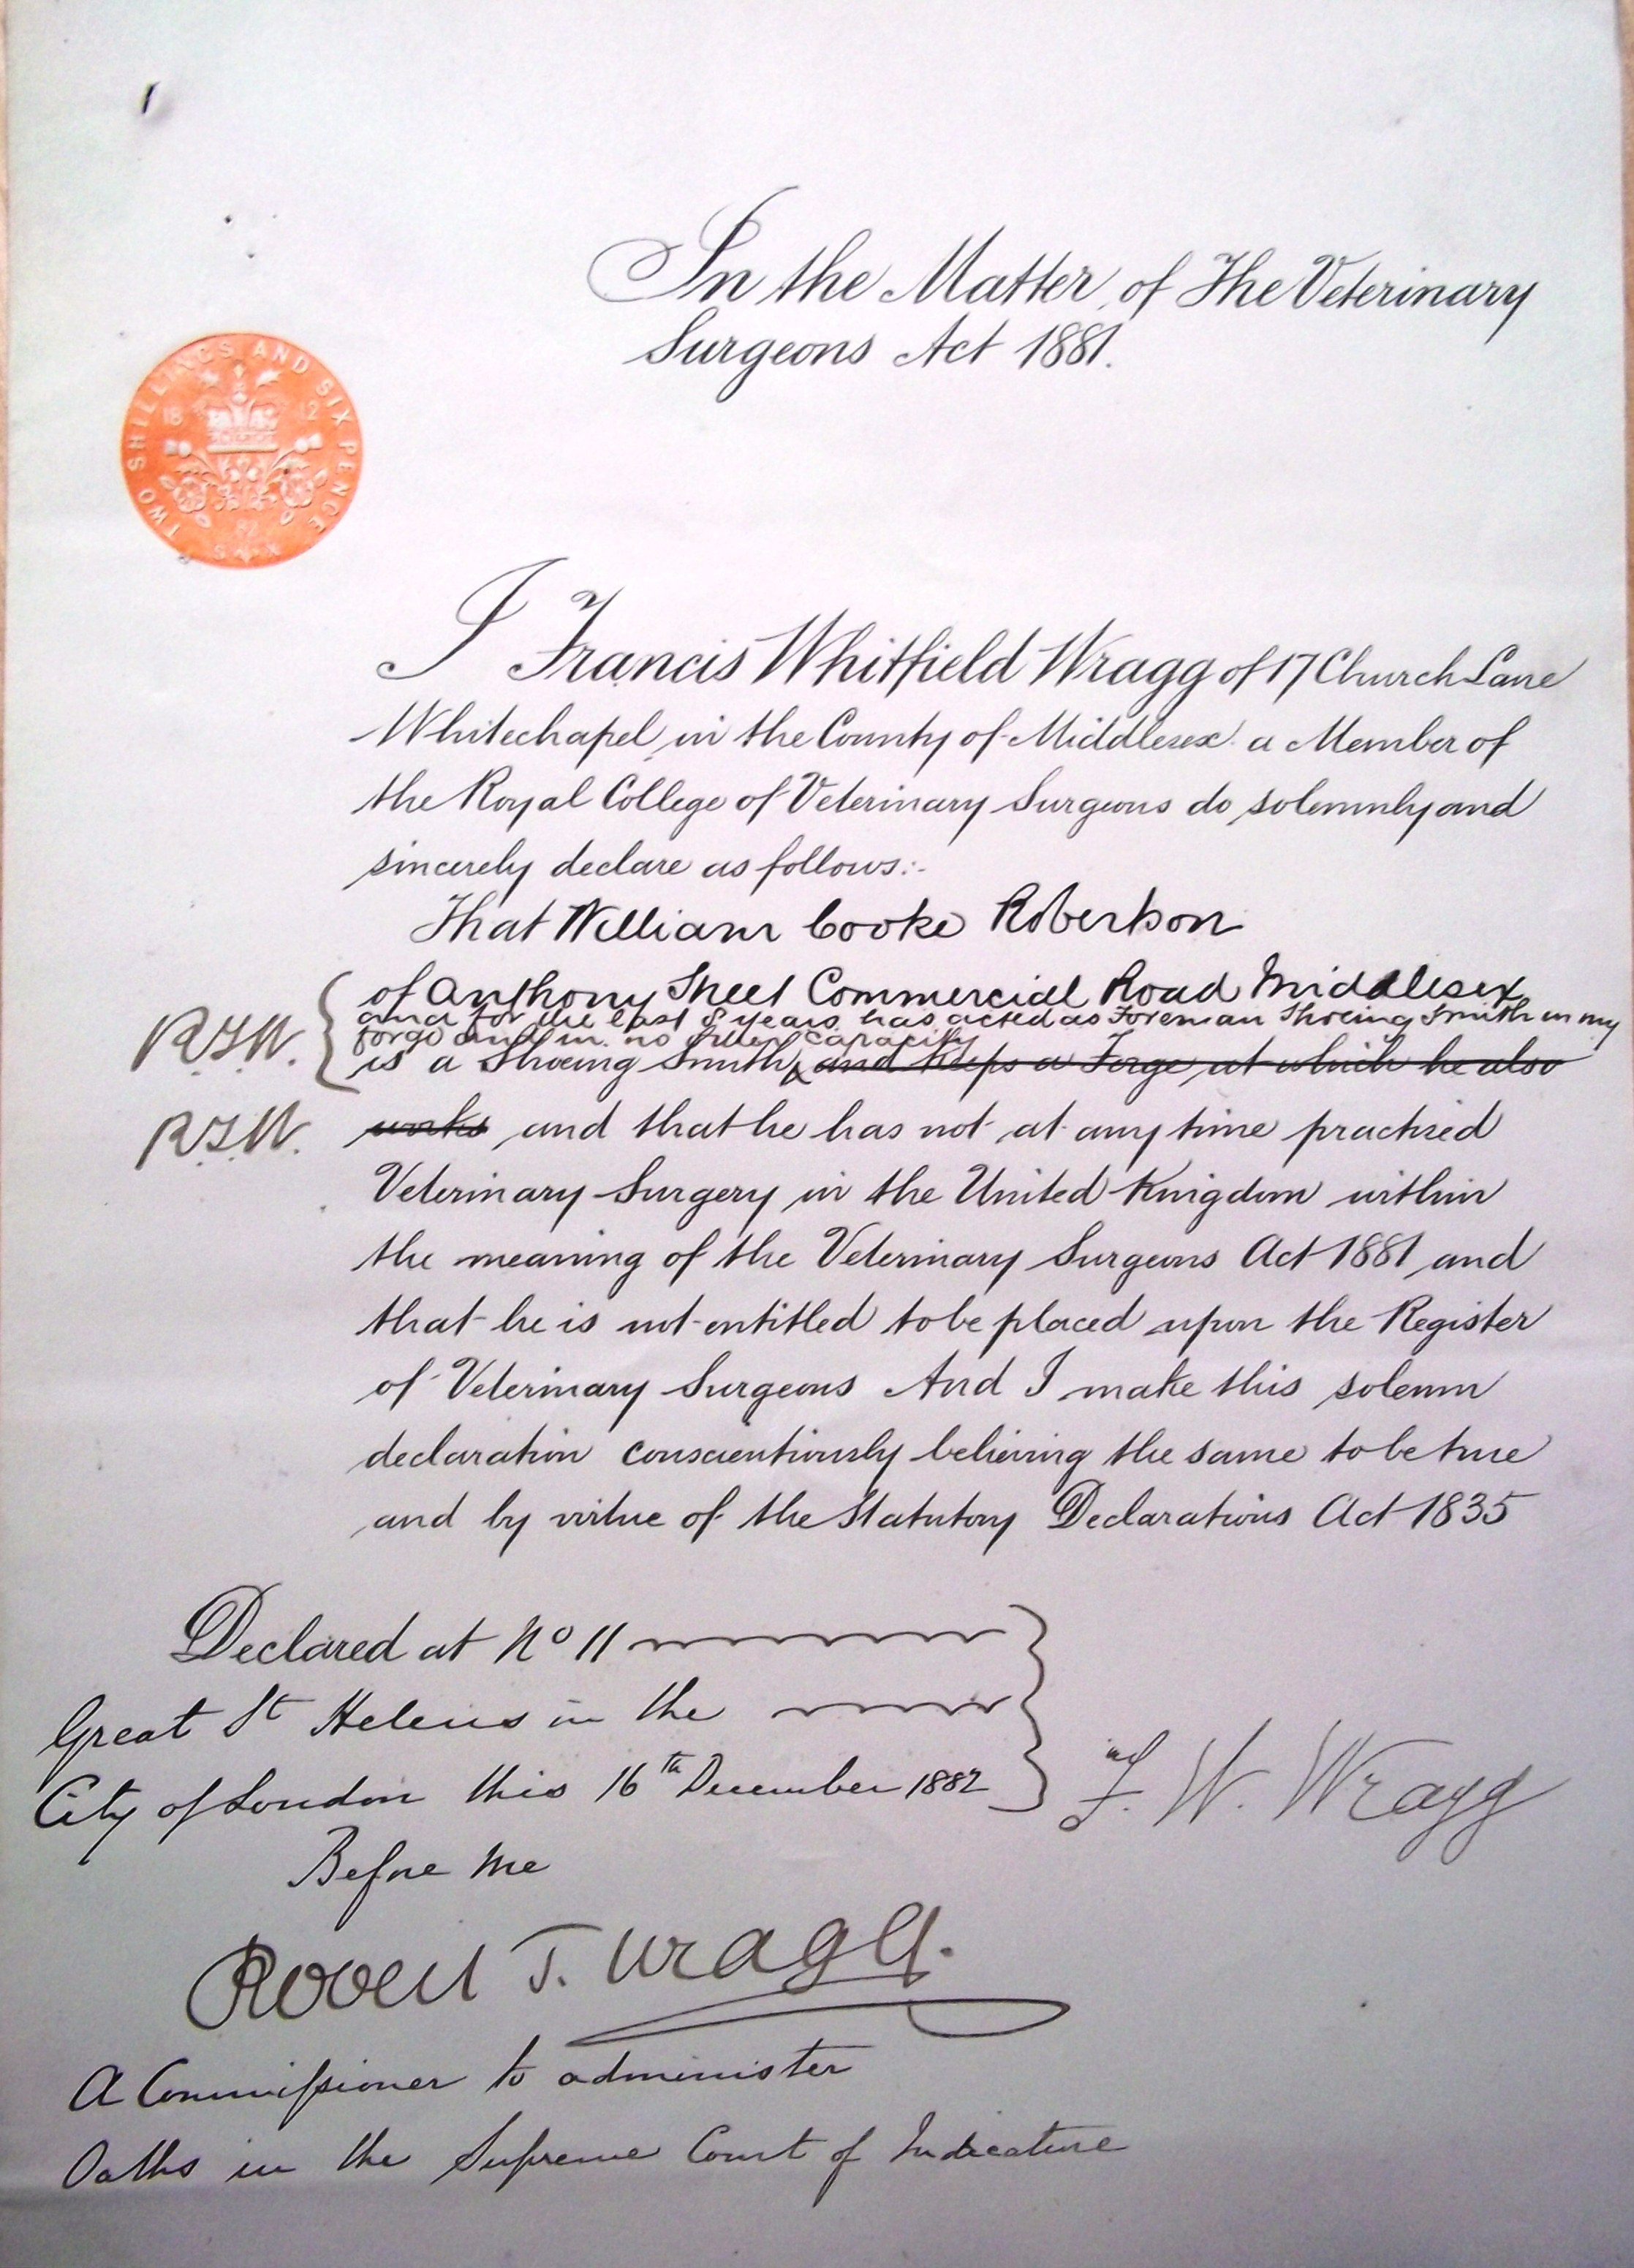 Wragg's letter of protest